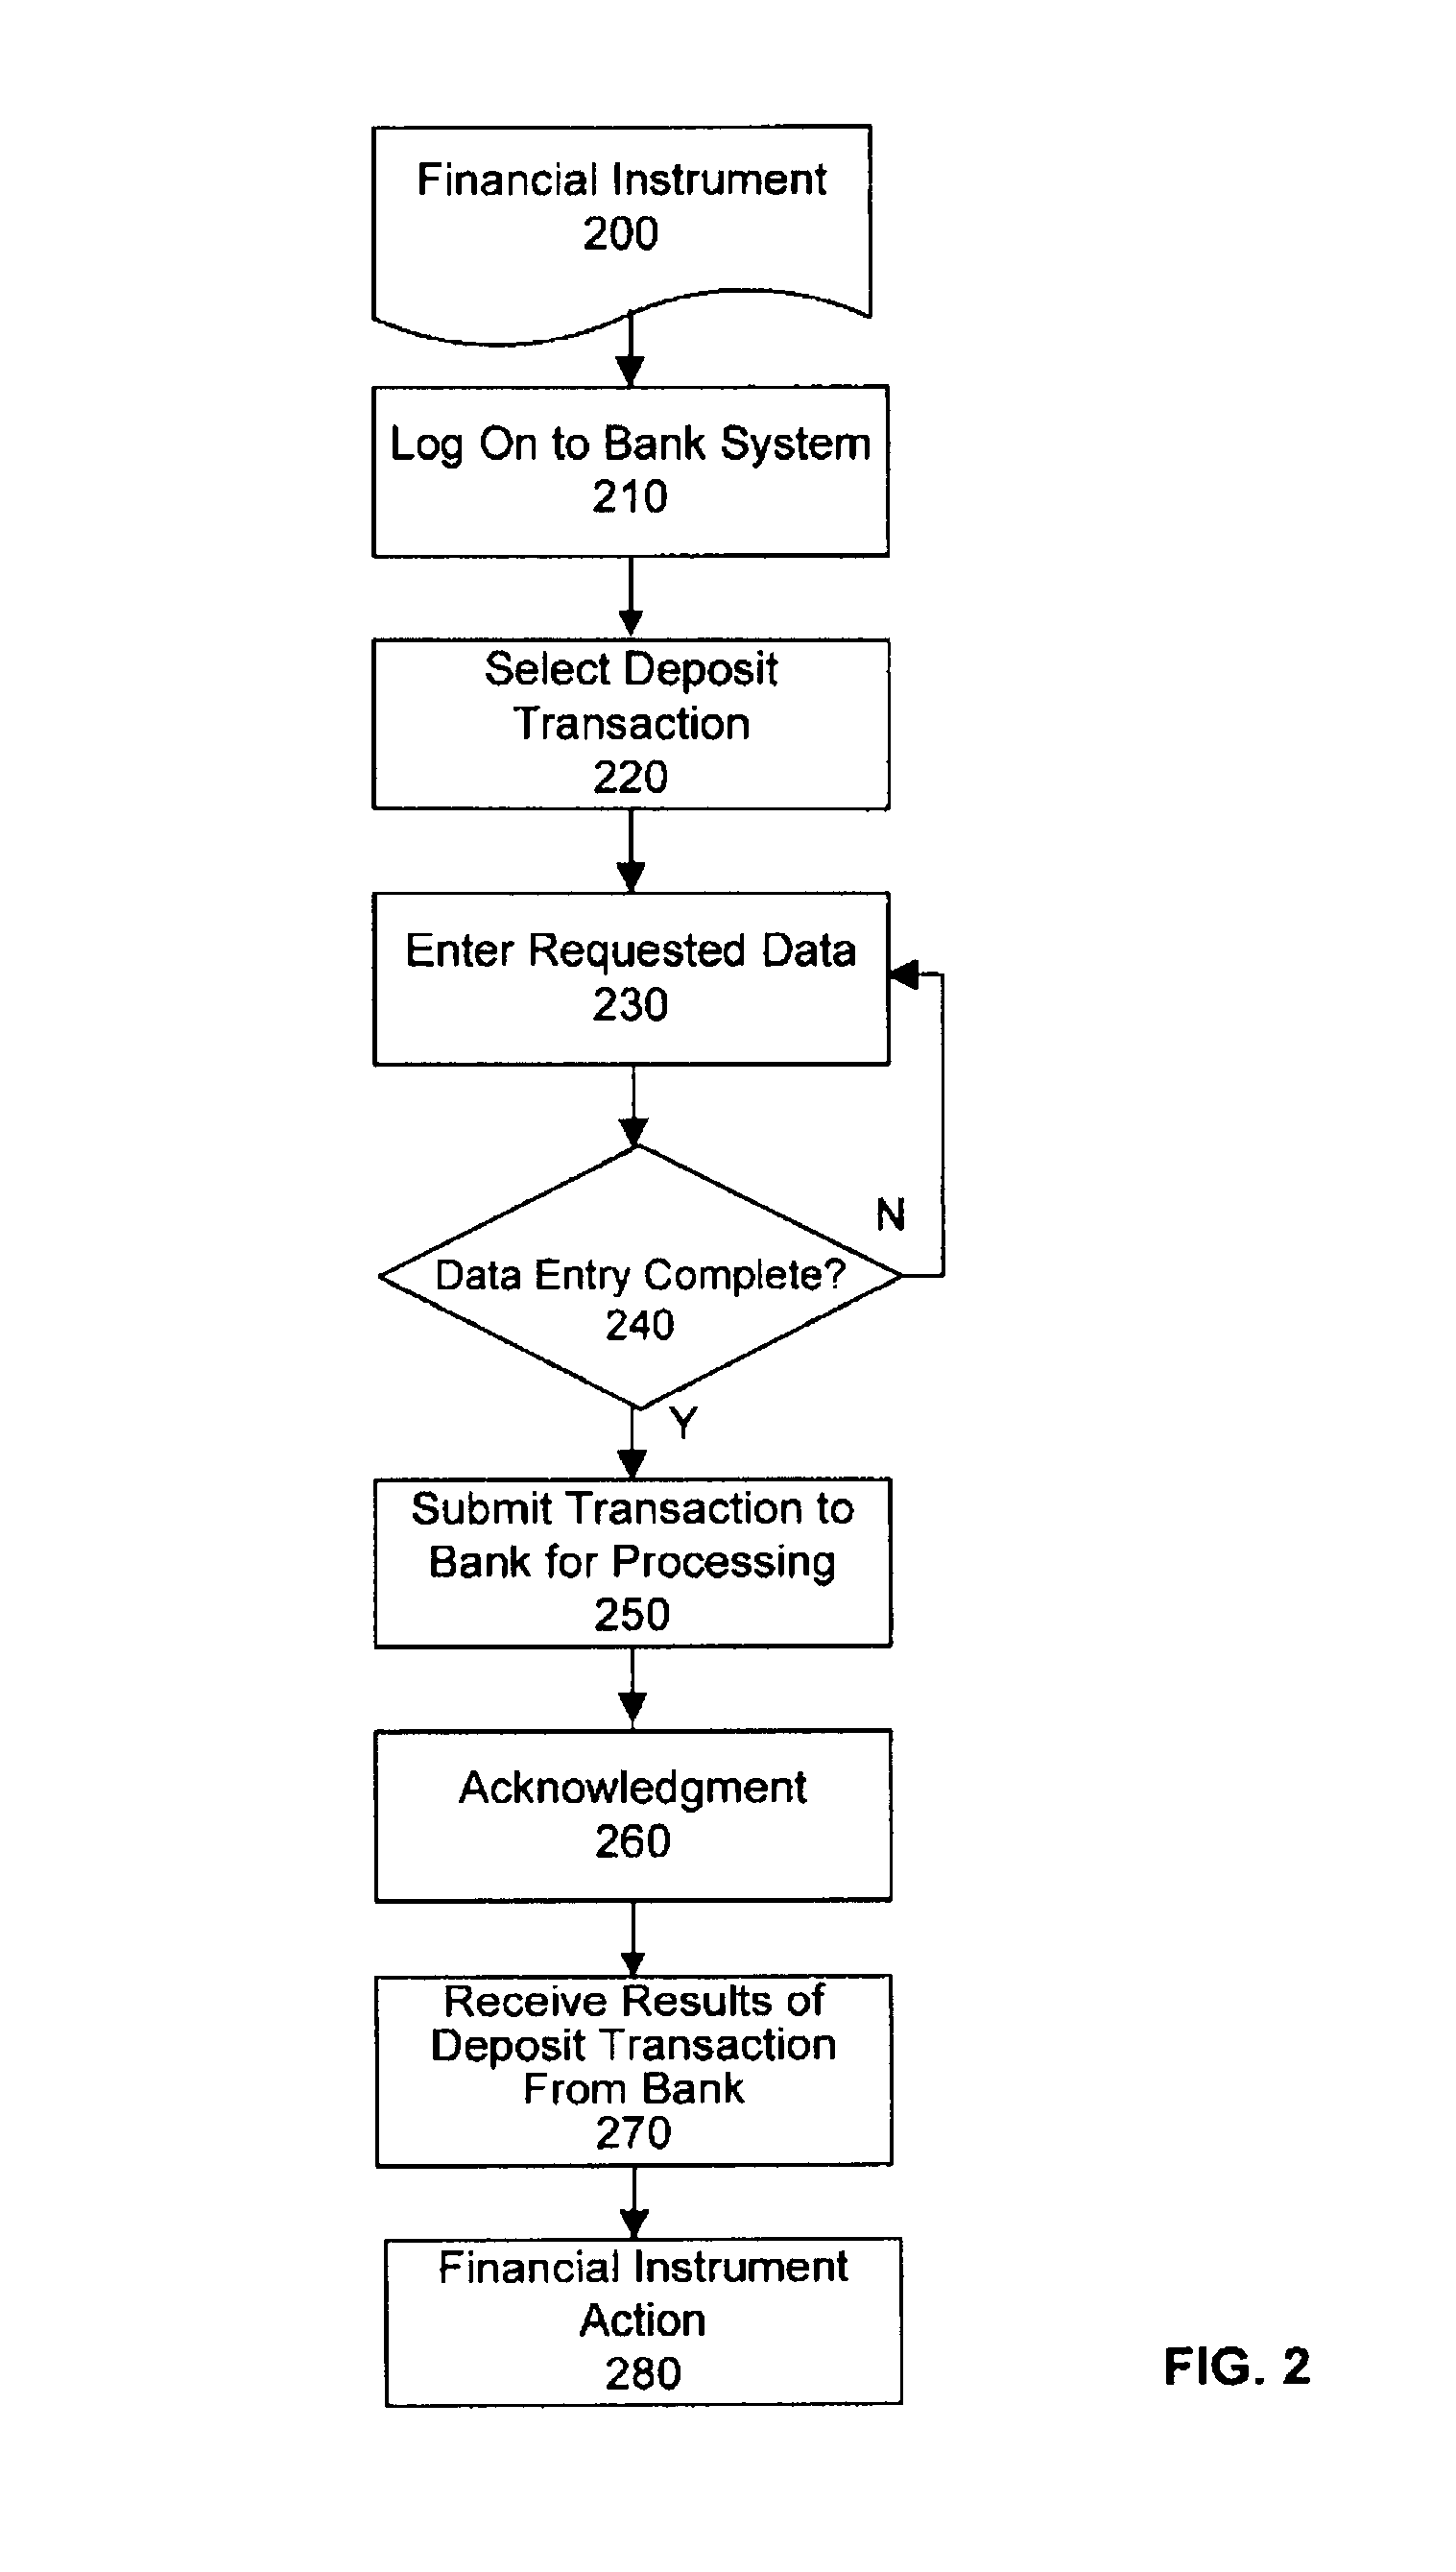 System and method for electronic deposit of a financial instrument by banking customers from remote locations by use of a digital image